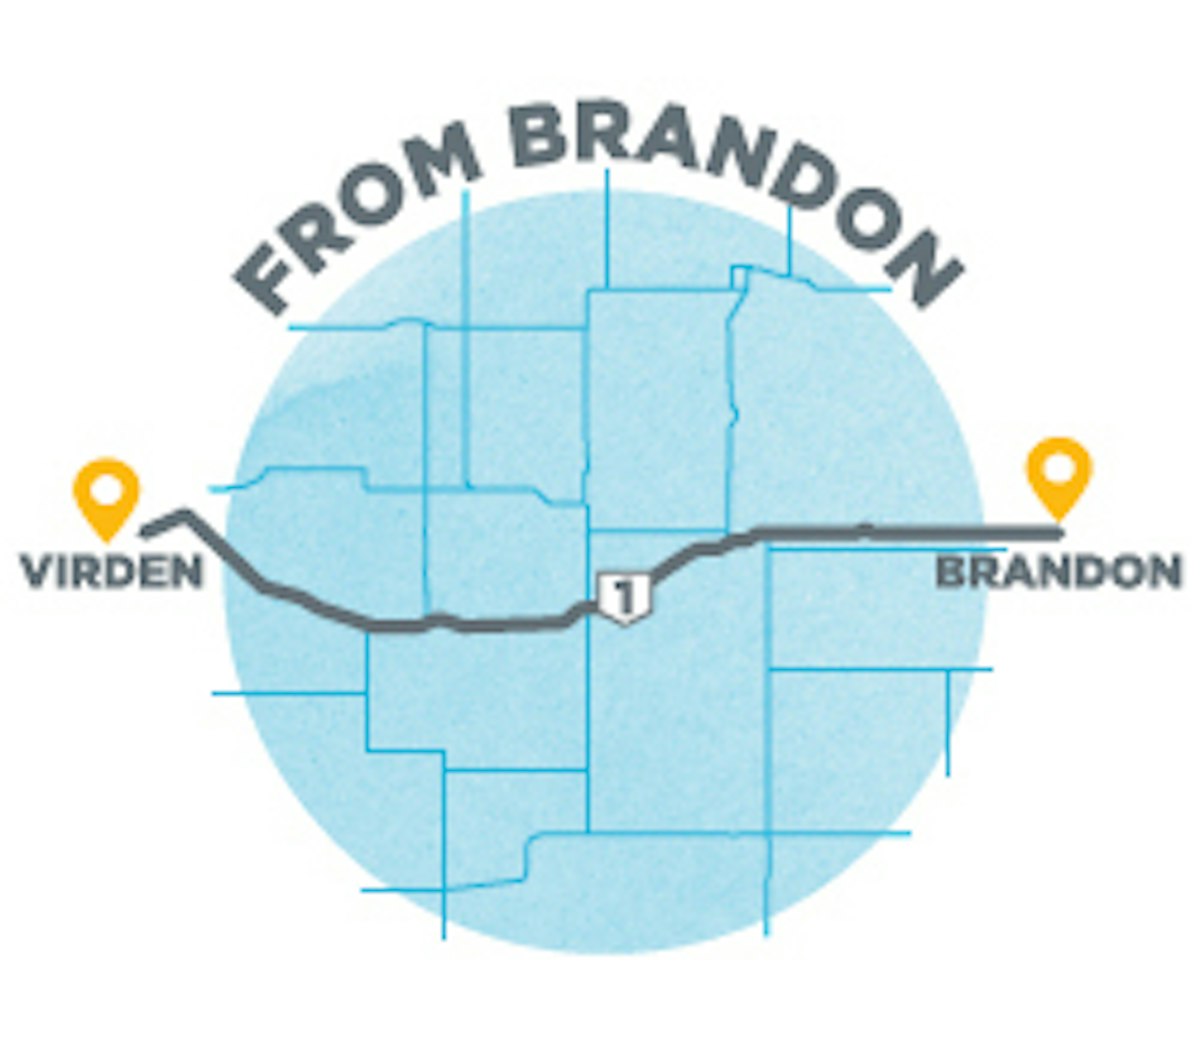 A map of the route from brandon to vindern.